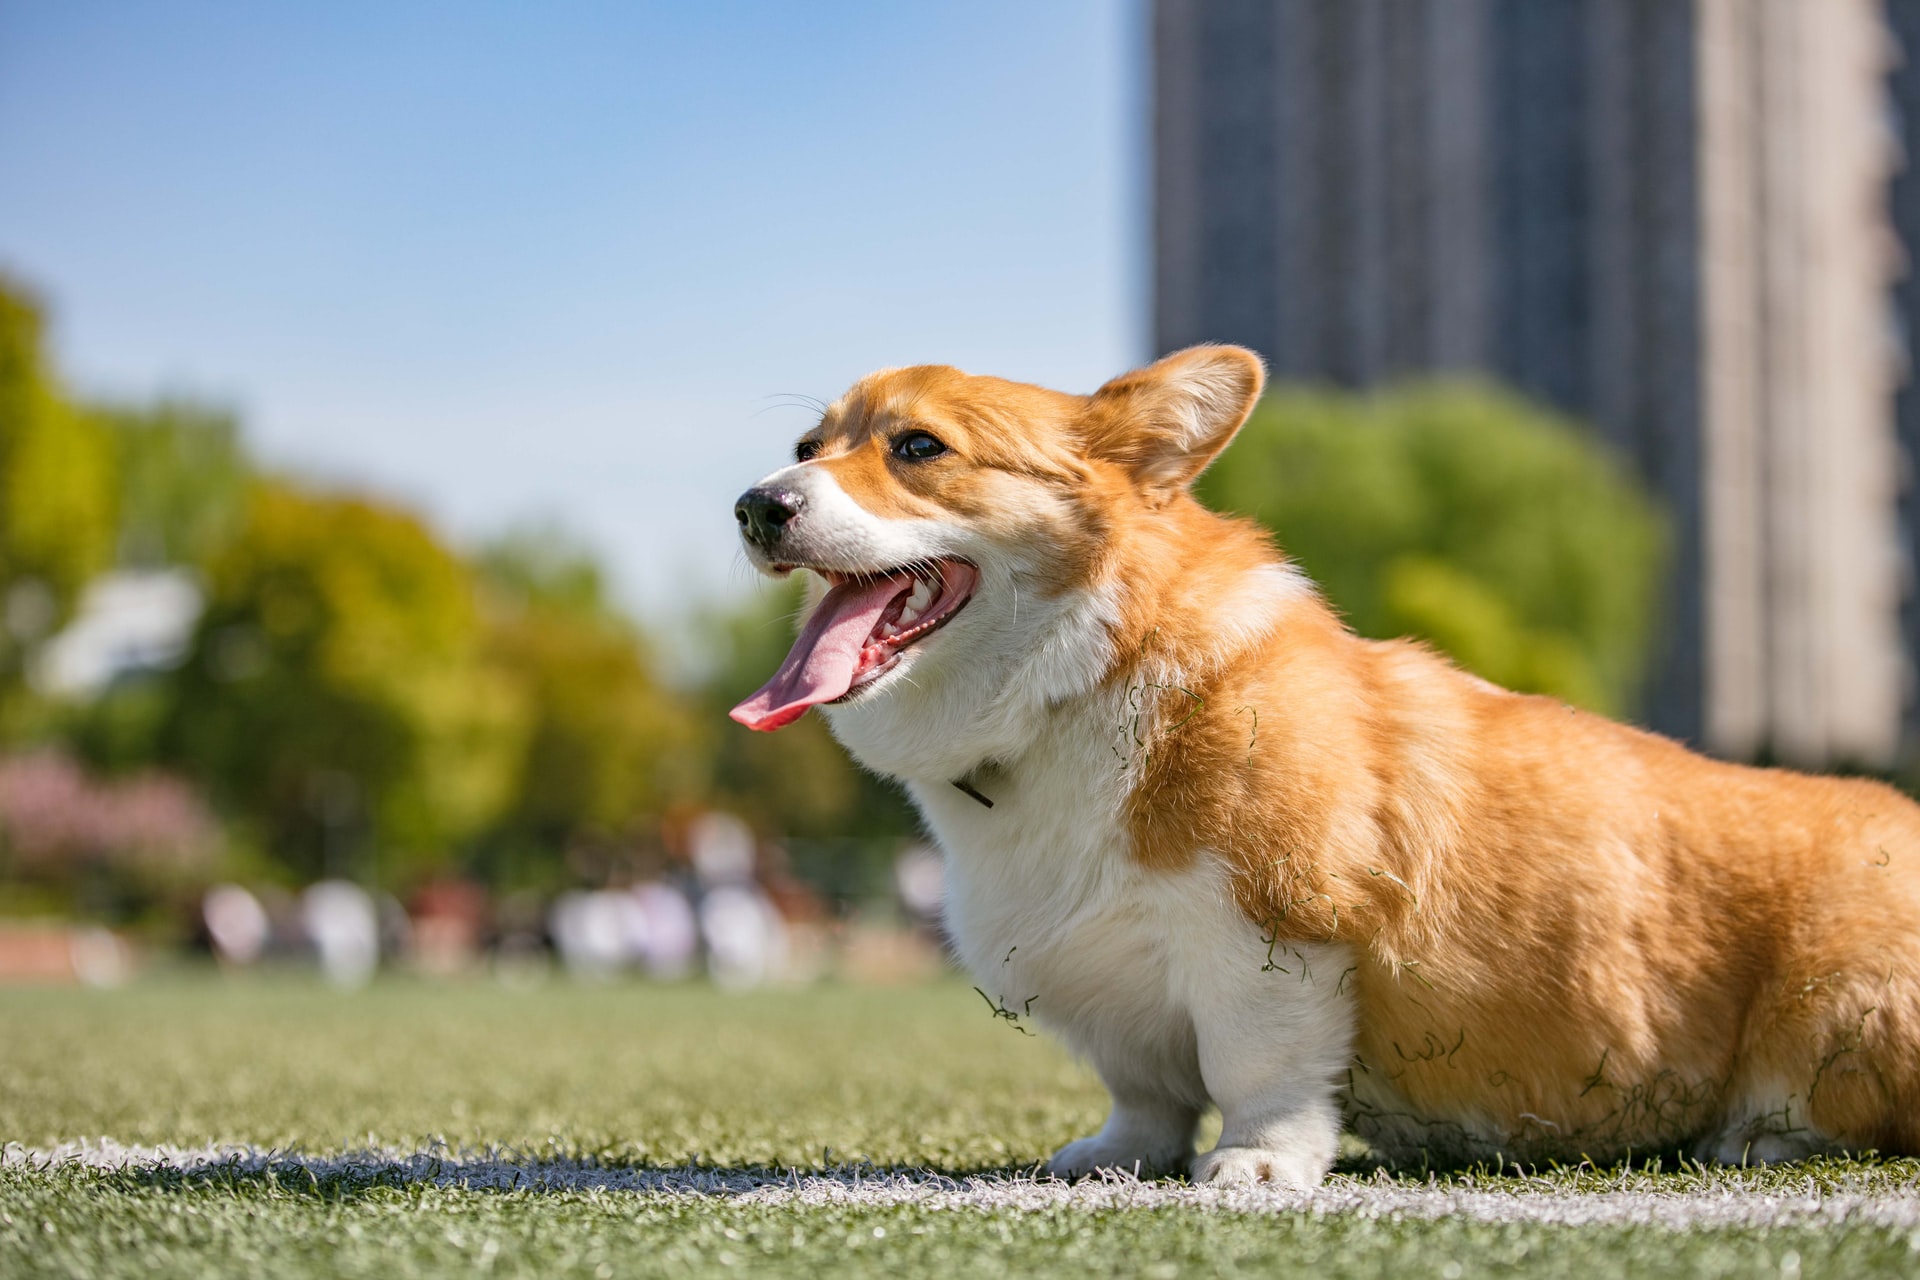 gum disease and heart disease in dogs - corgi on grass